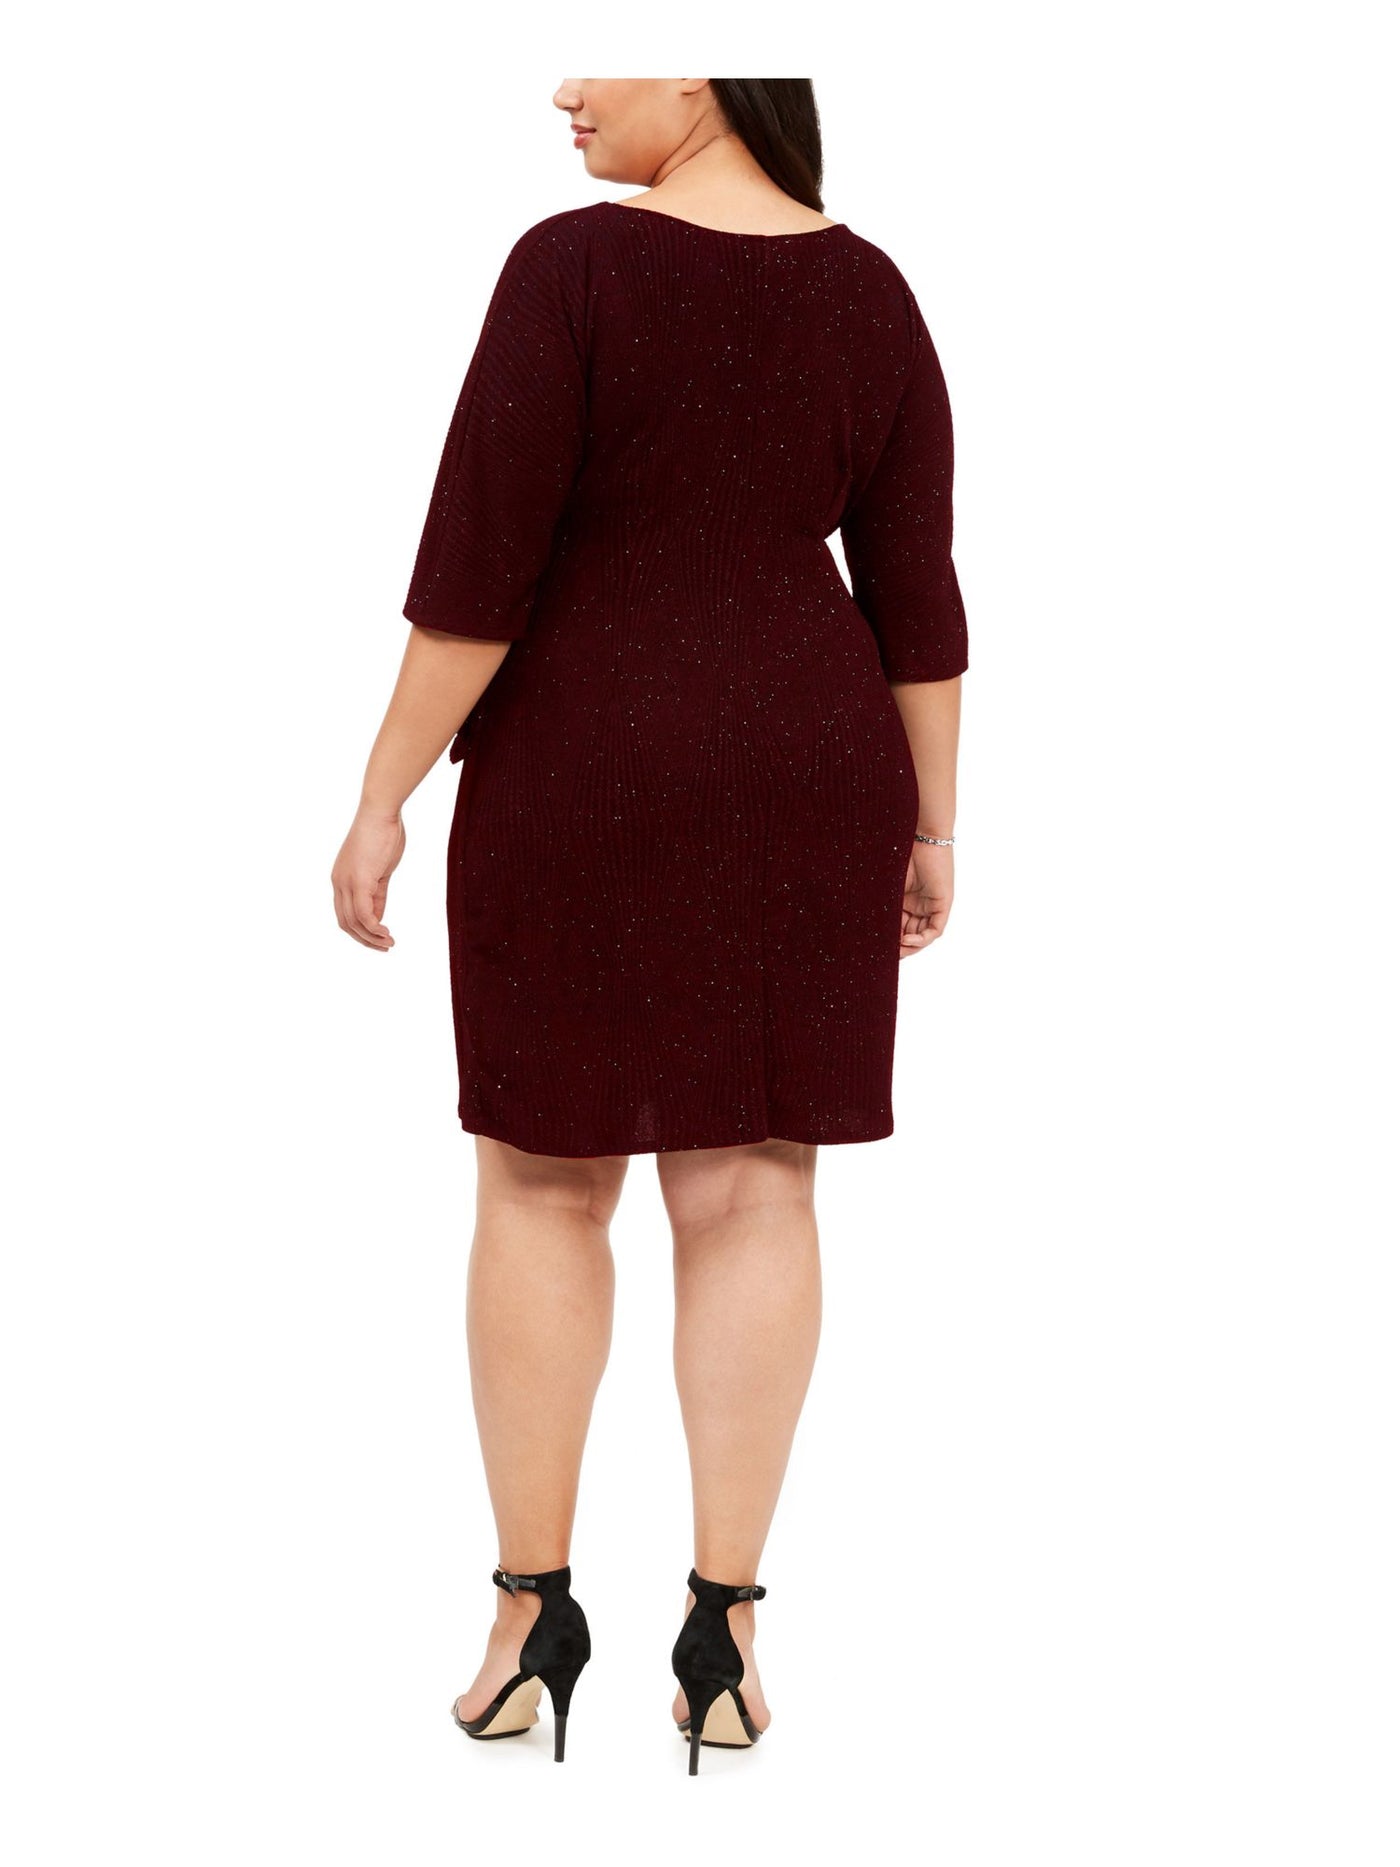 SIGNATURE BY ROBBIE BEE Womens Maroon 3/4 Sleeve Jewel Neck Above The Knee Party Sheath Dress Plus 3X